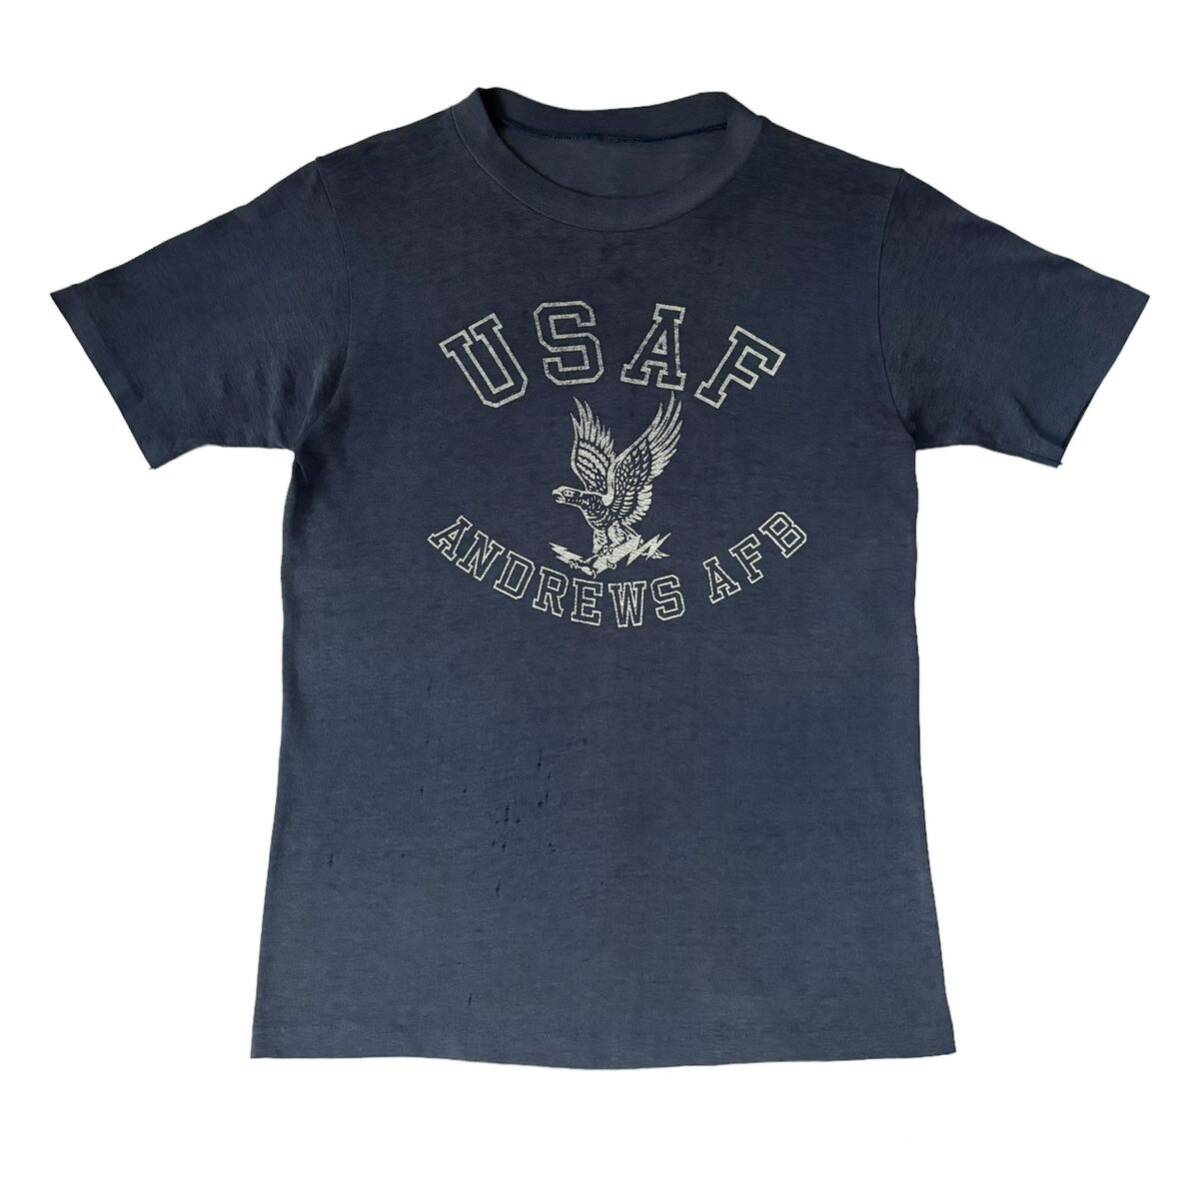 80s Unkown USAF Andrews AFB Cotton Polyester Print Tee 80年代 アメリカ空軍 プリント Tシャツ military ミリタリー 米空軍 Air Force_画像1